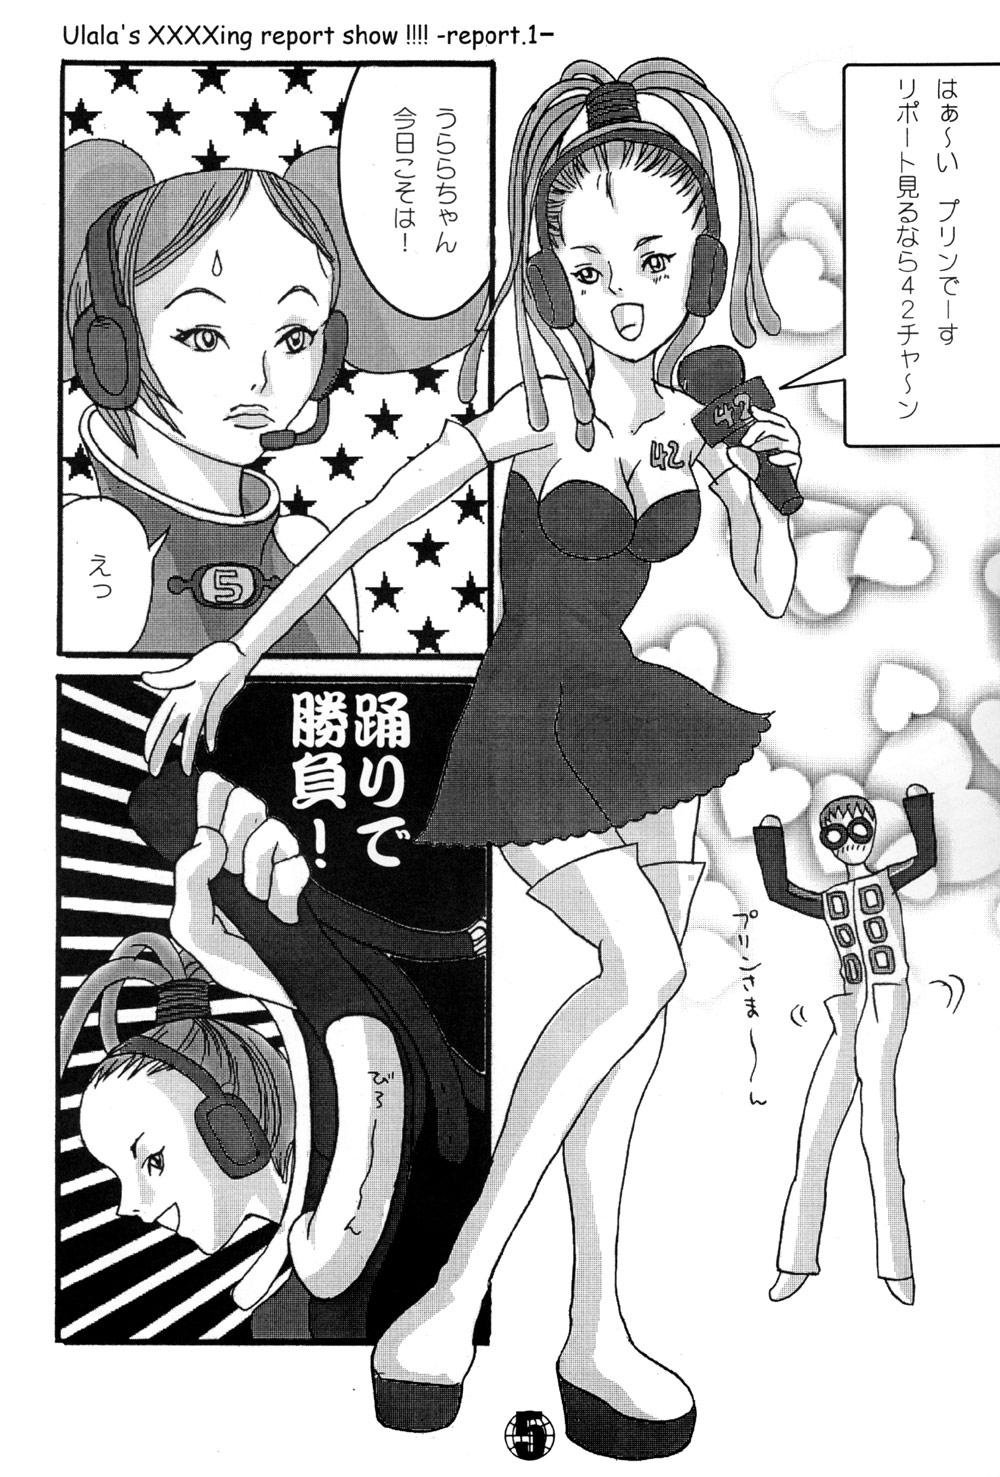  Ulala's XXXXing Report Show!!!! - Space channel 5 Free Amateur - Page 5